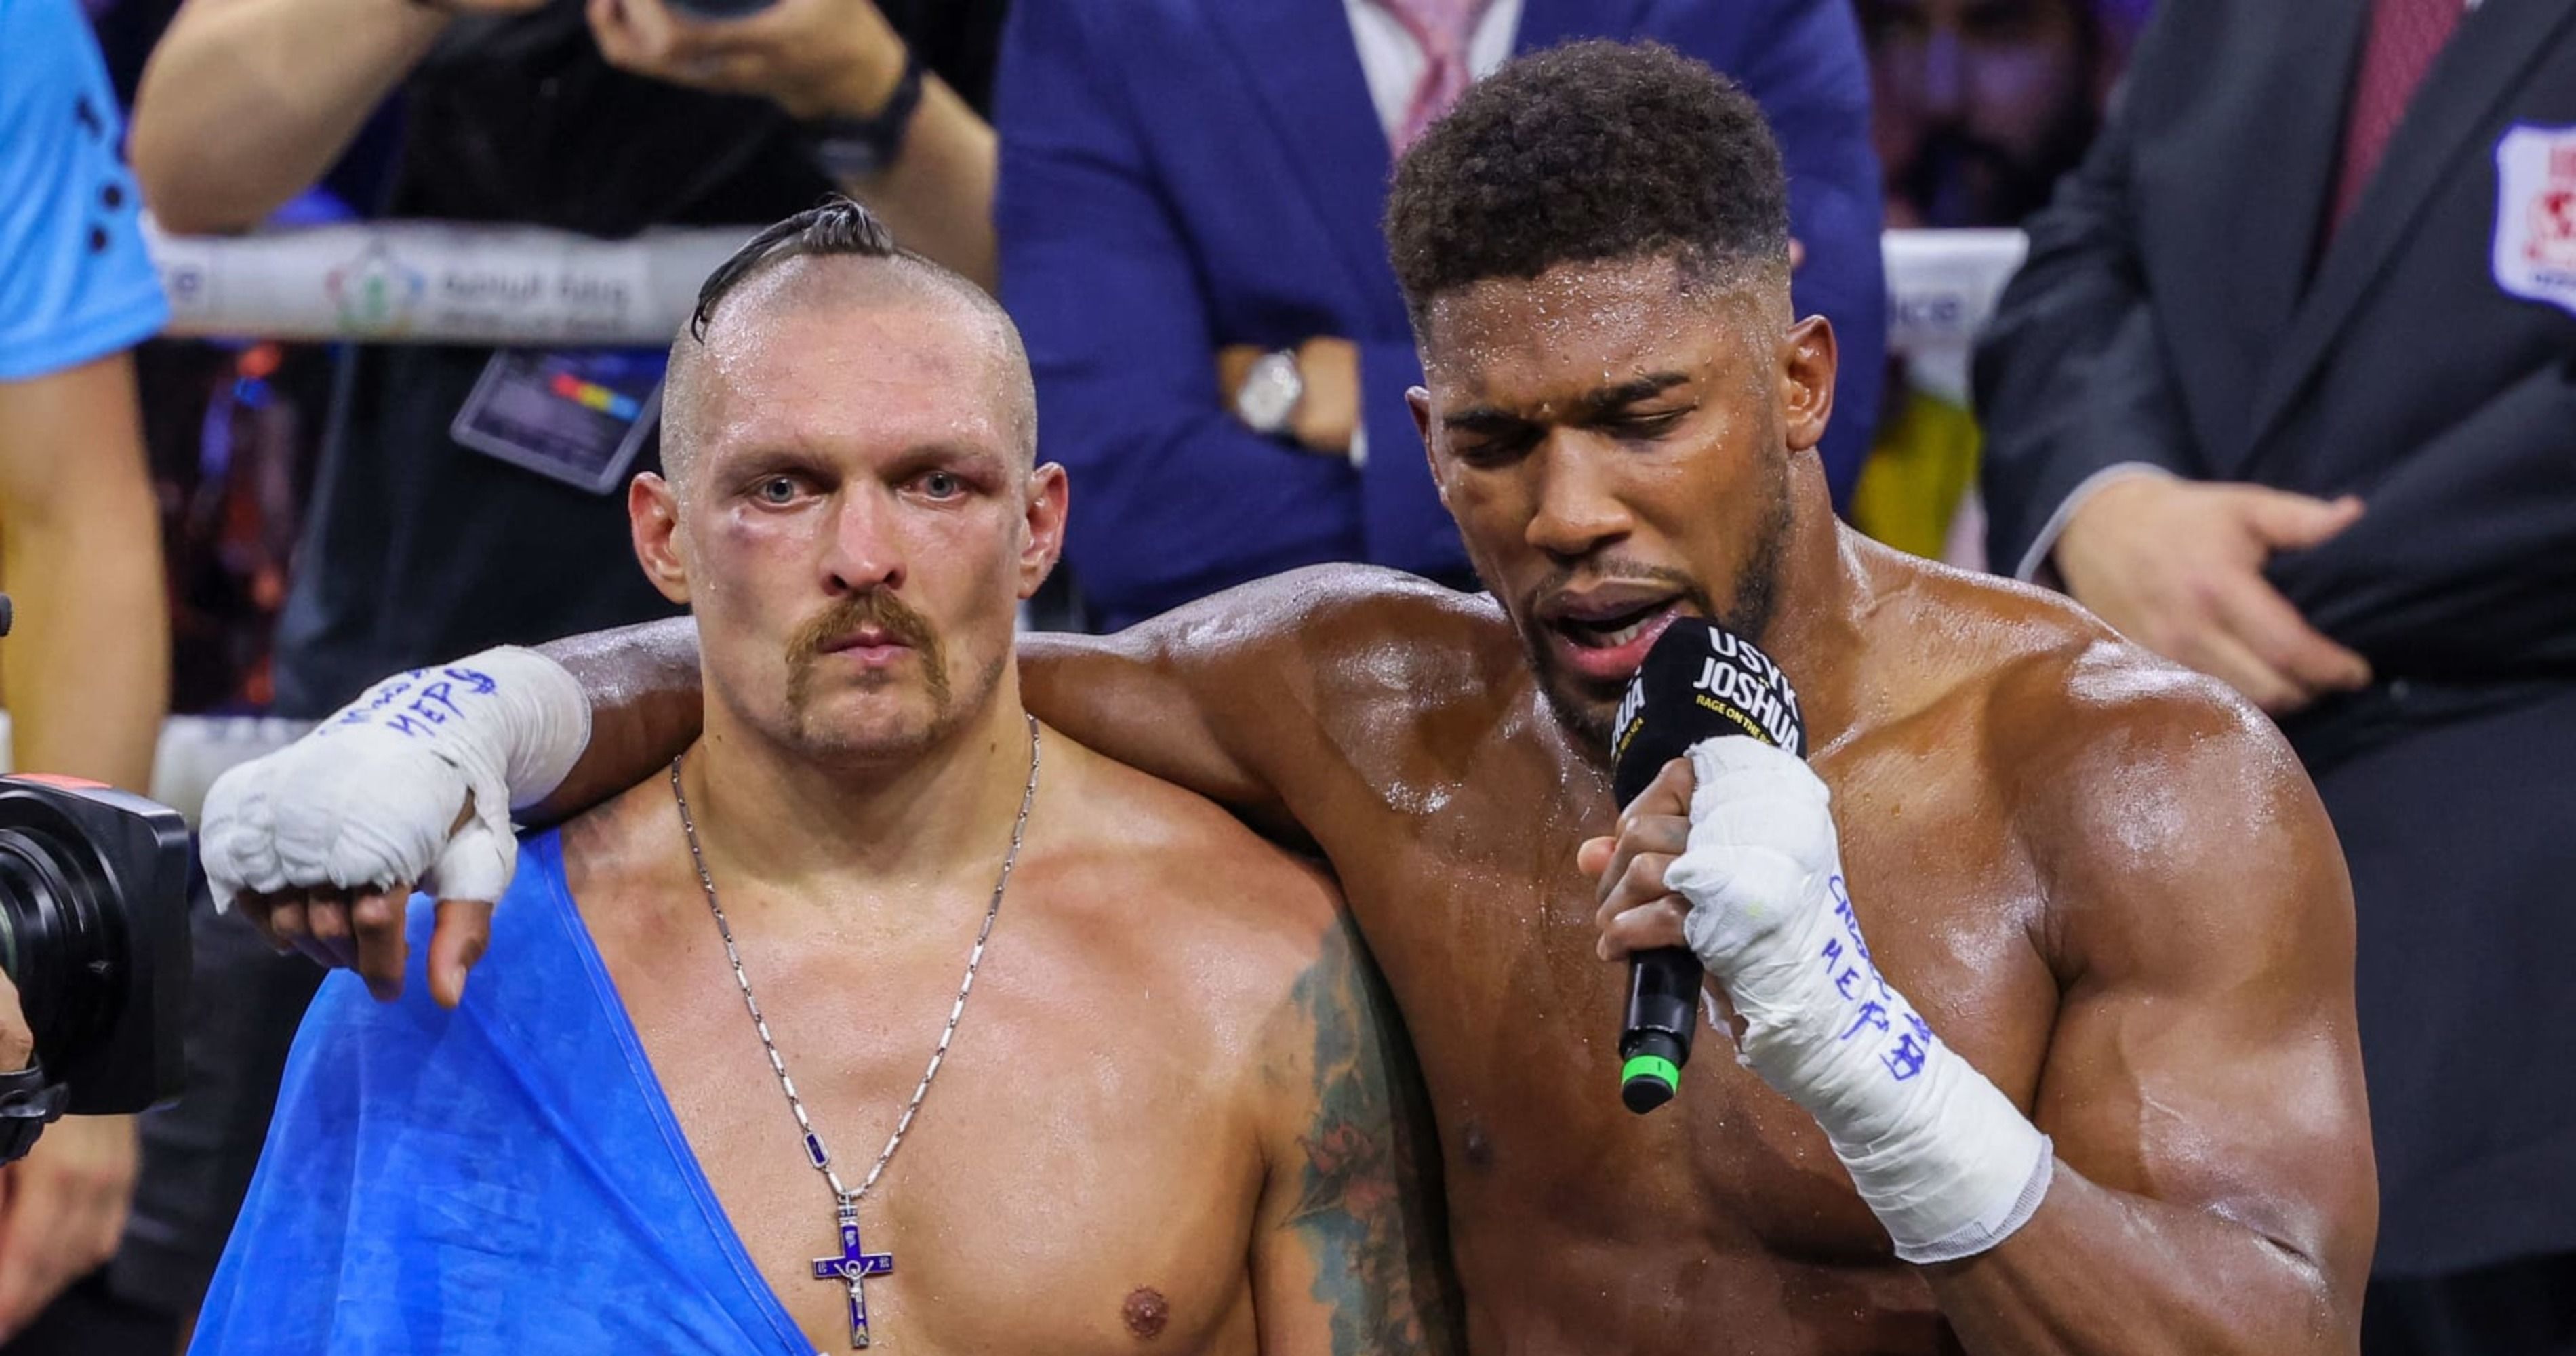 Joshua Plans To Face The Winner Of Fury vs Usyk